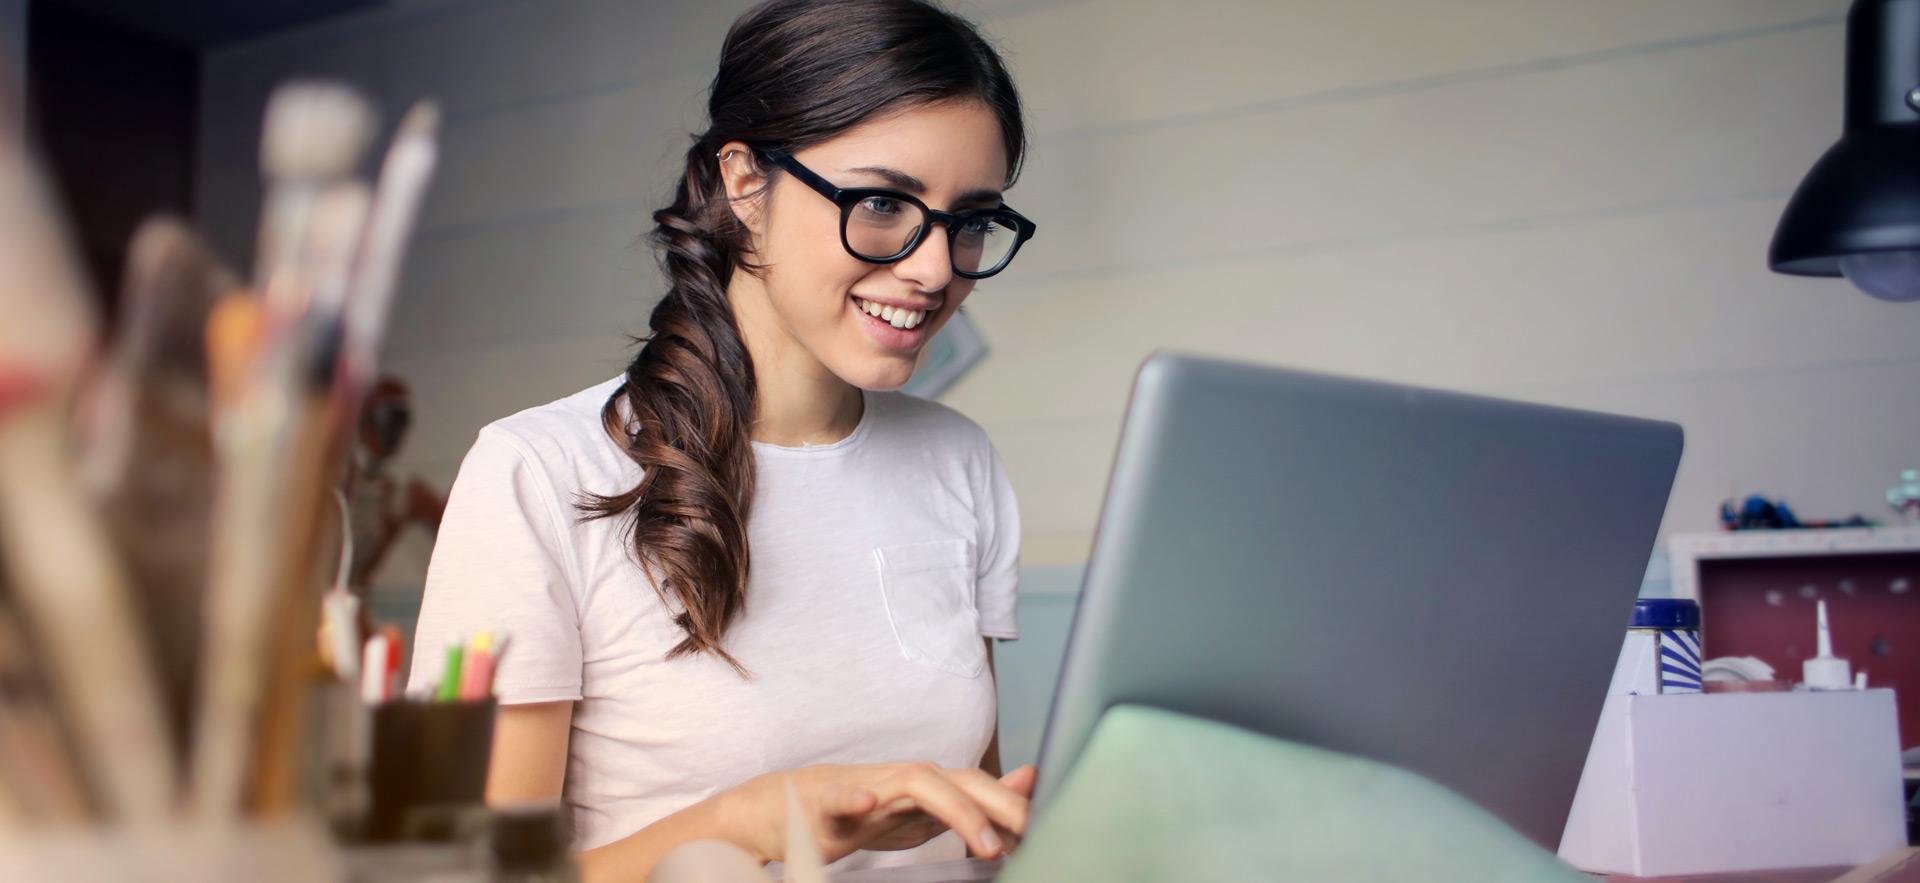 young woman smiling working on computer